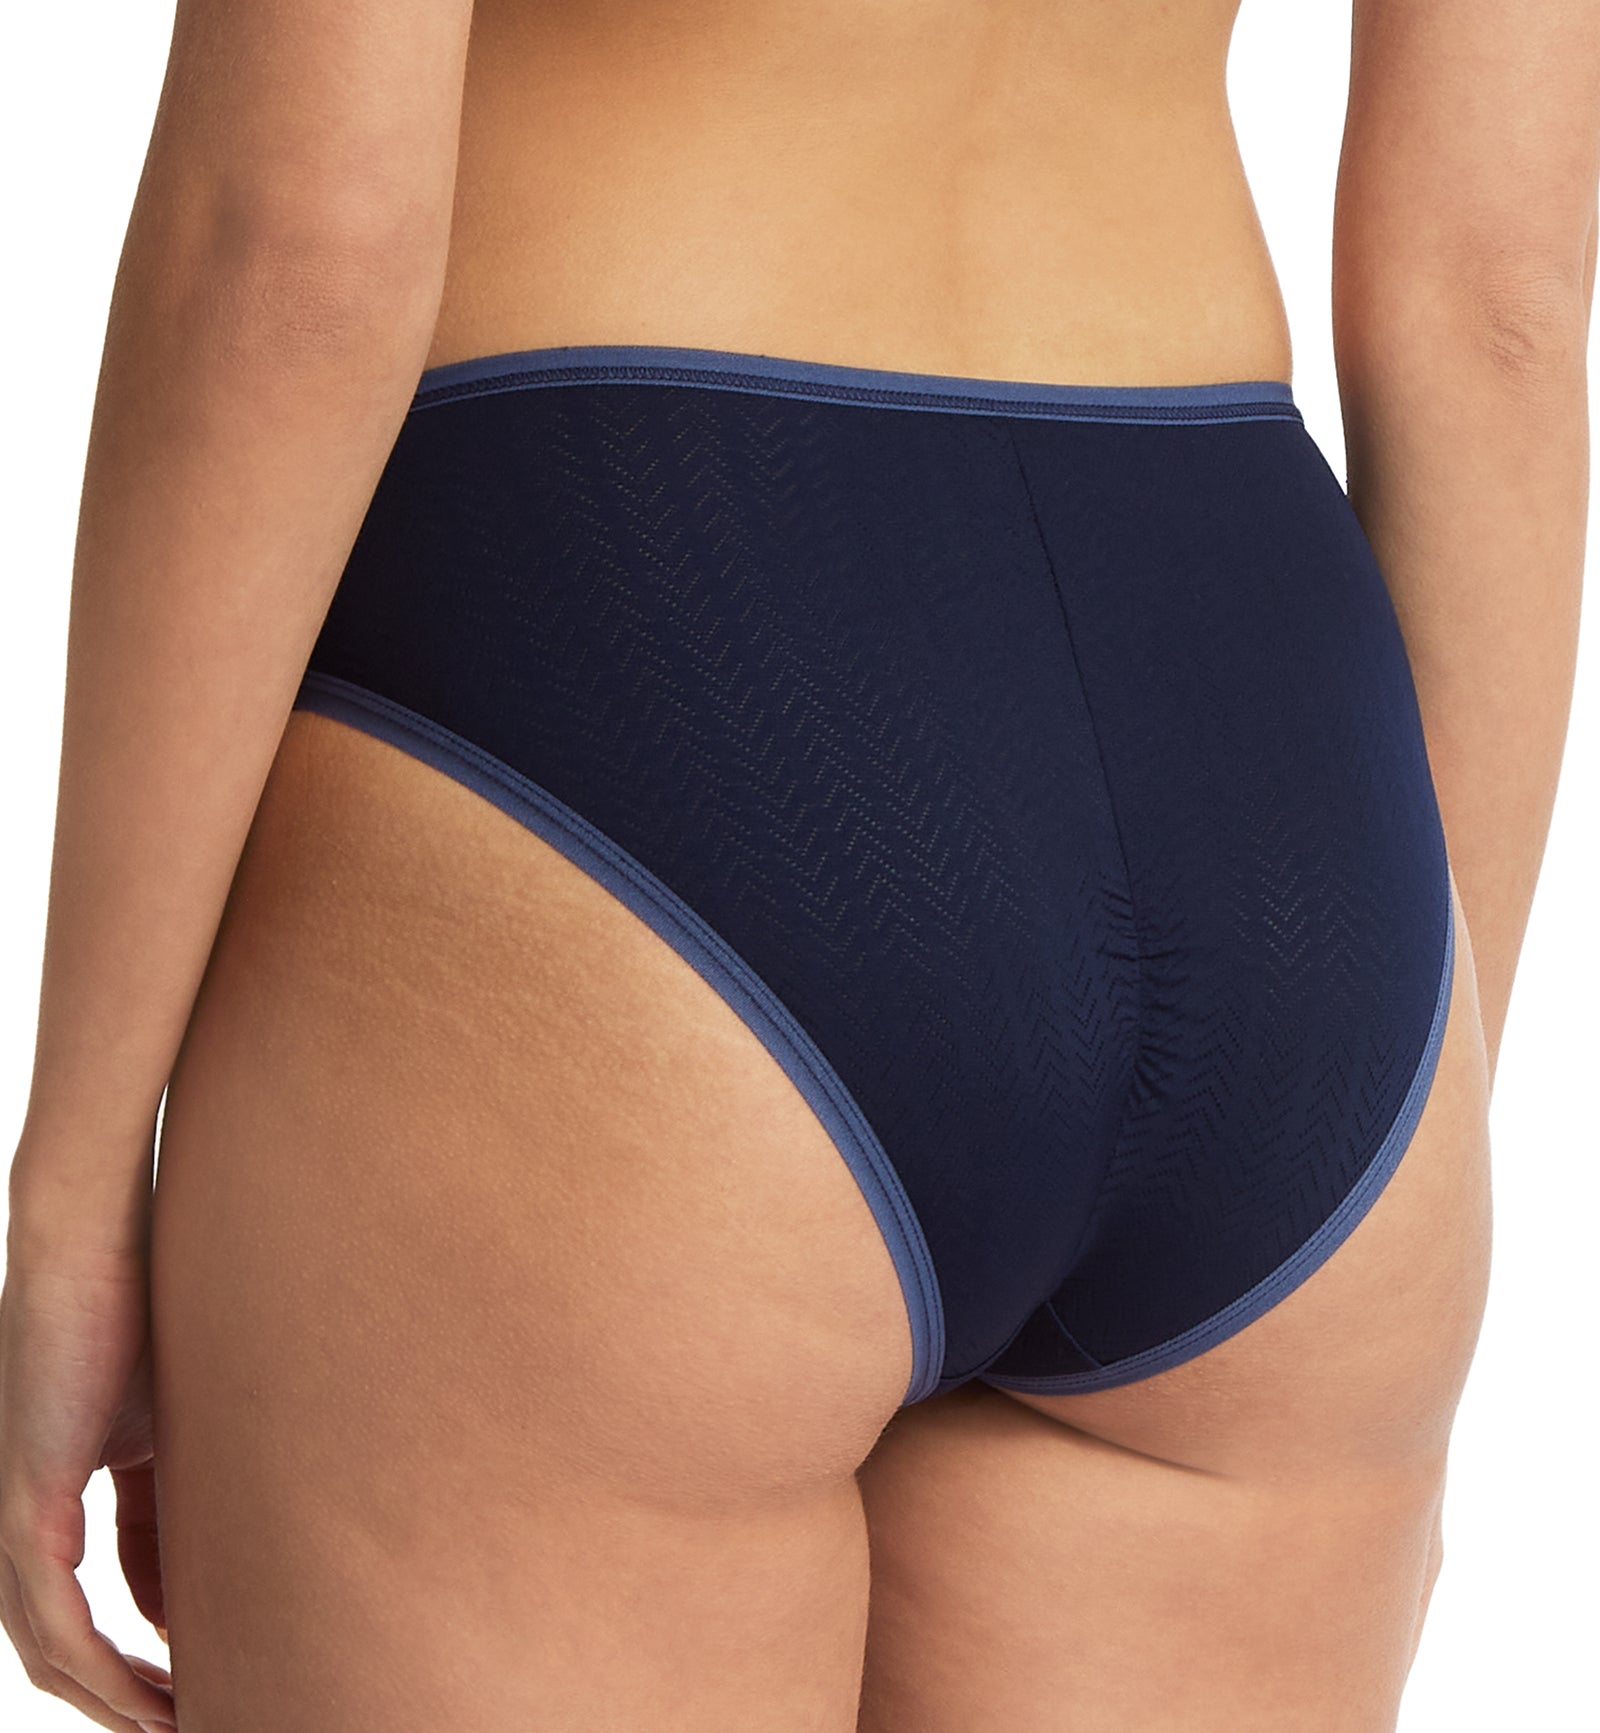 Hanky Panky MoveCalm Ruched Back Brief (2P2184),XS,Blackberry Crumble/Waterfall Blue - Blackberry Crumble/Waterfall Blue,XS